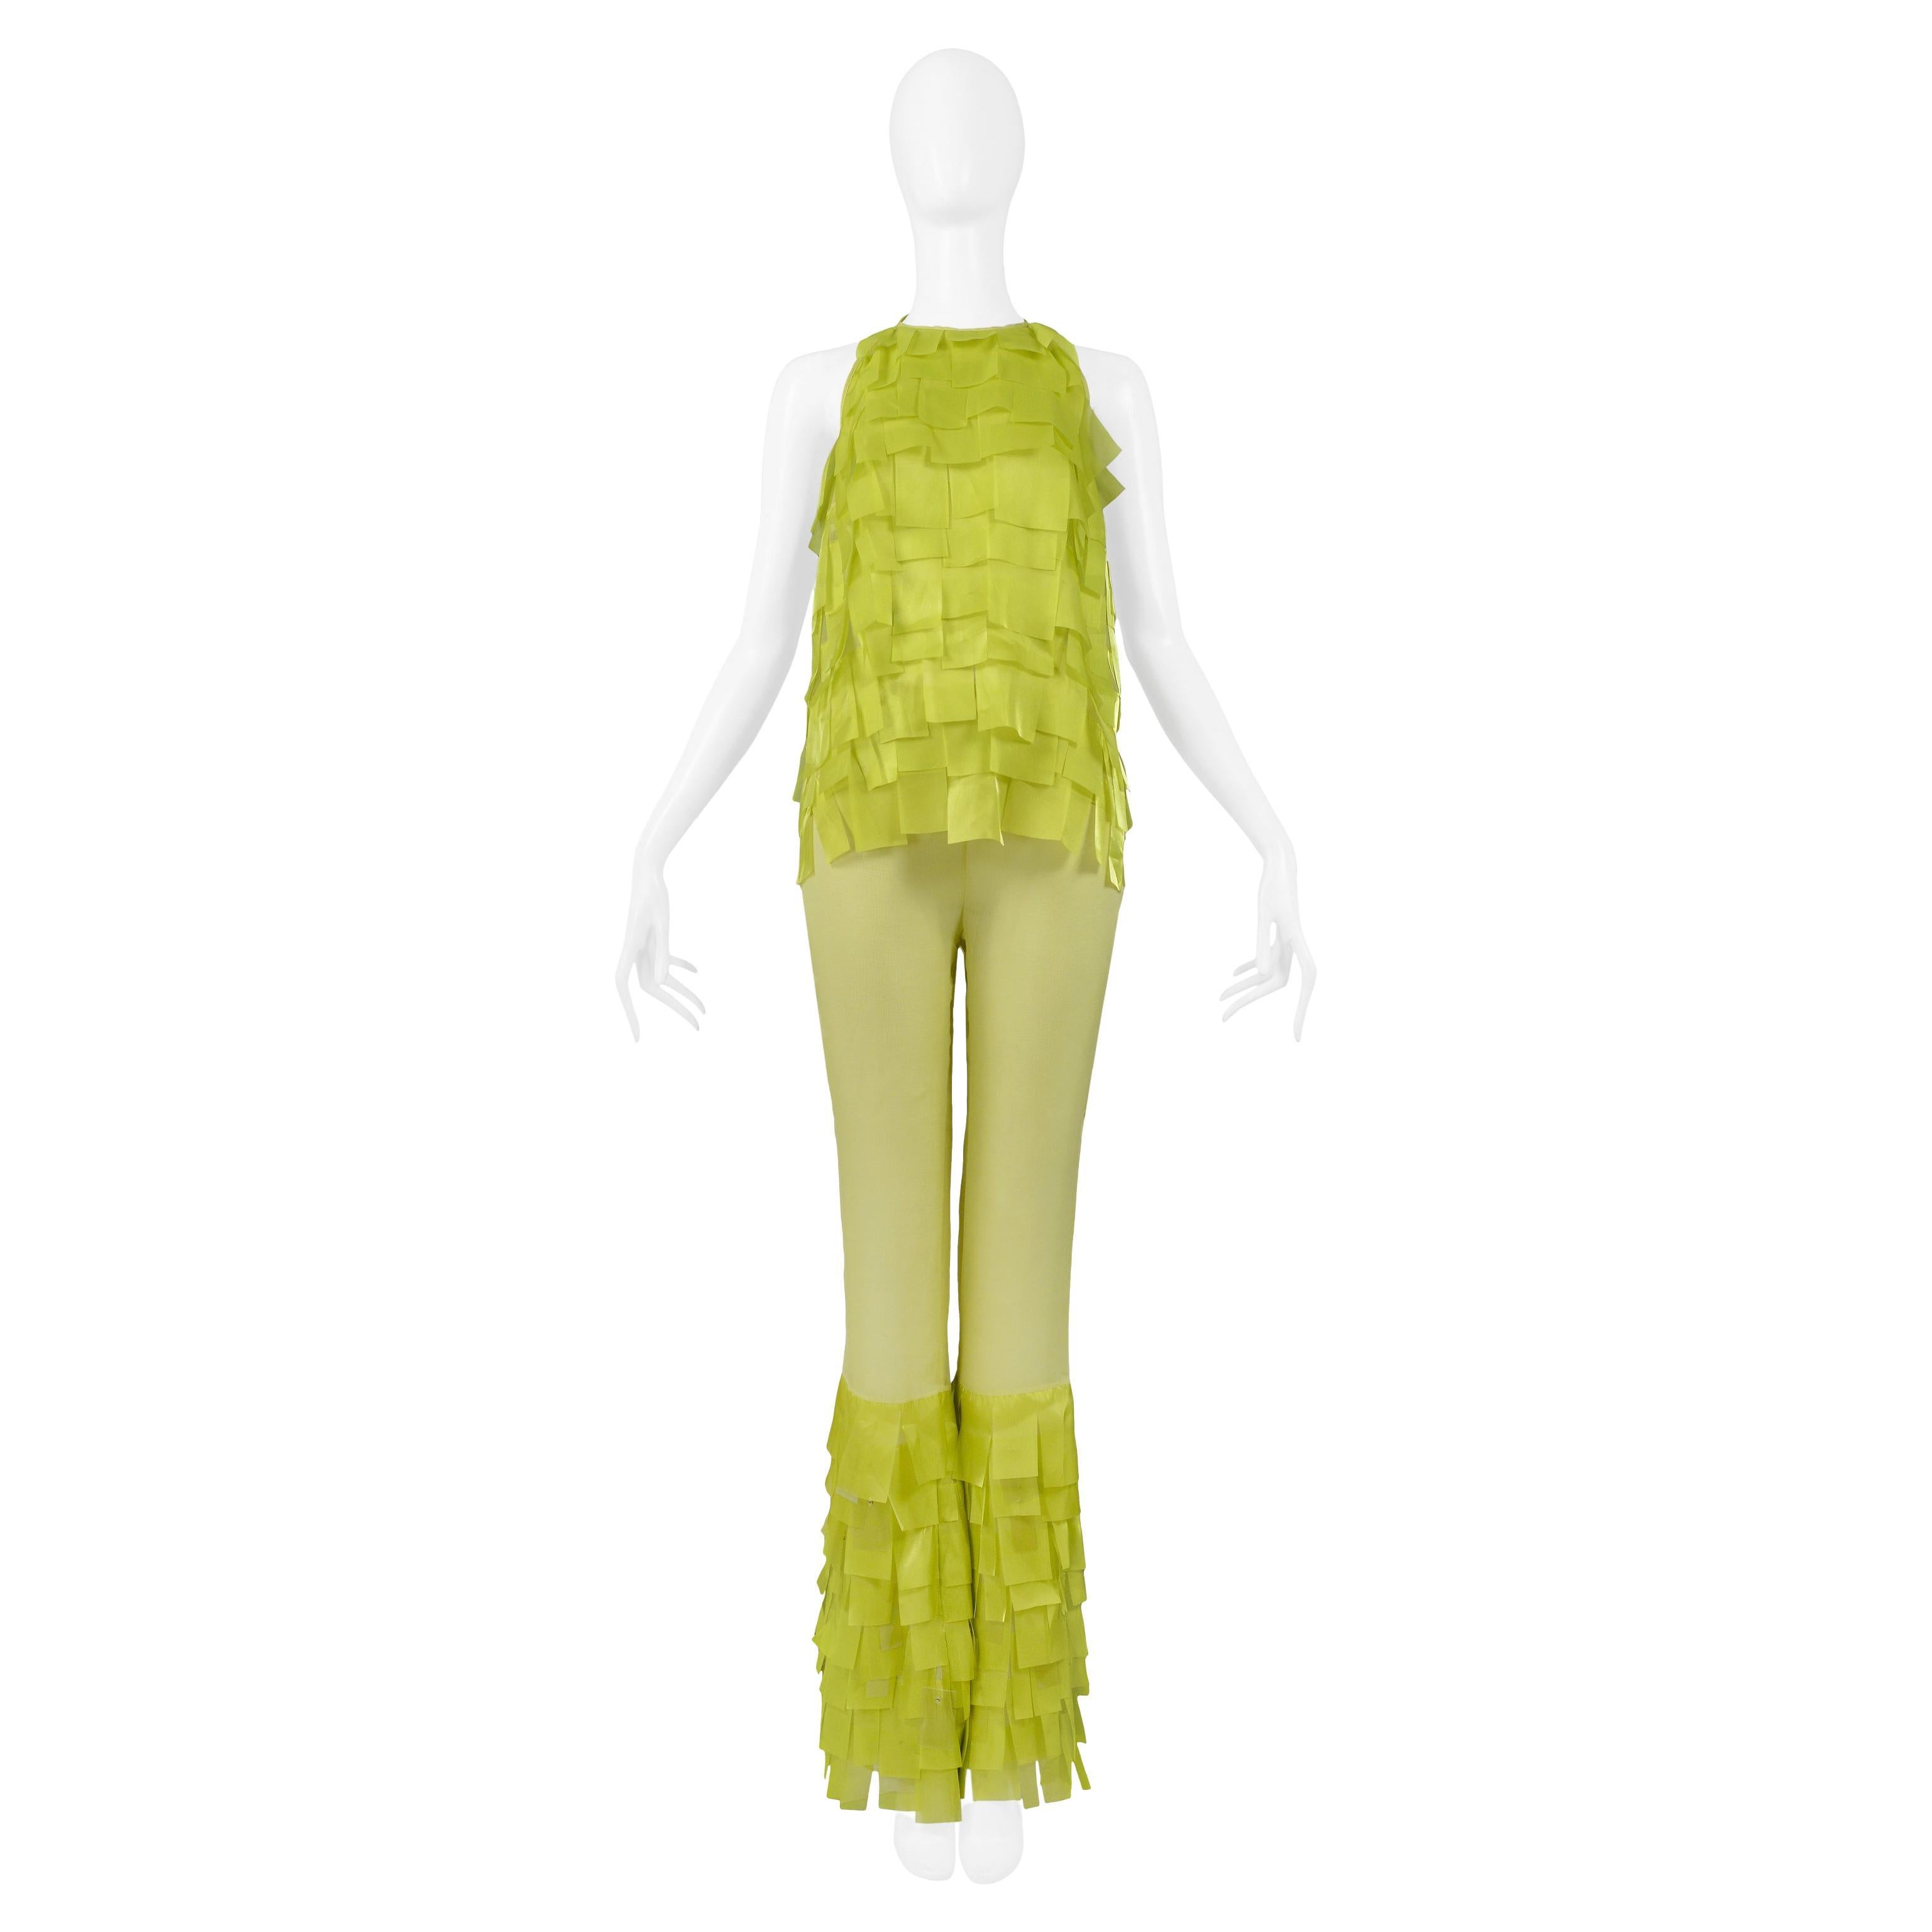 Paco Rabanne Chartreuse Green Textured Top & Bell Bottom Pants 2001